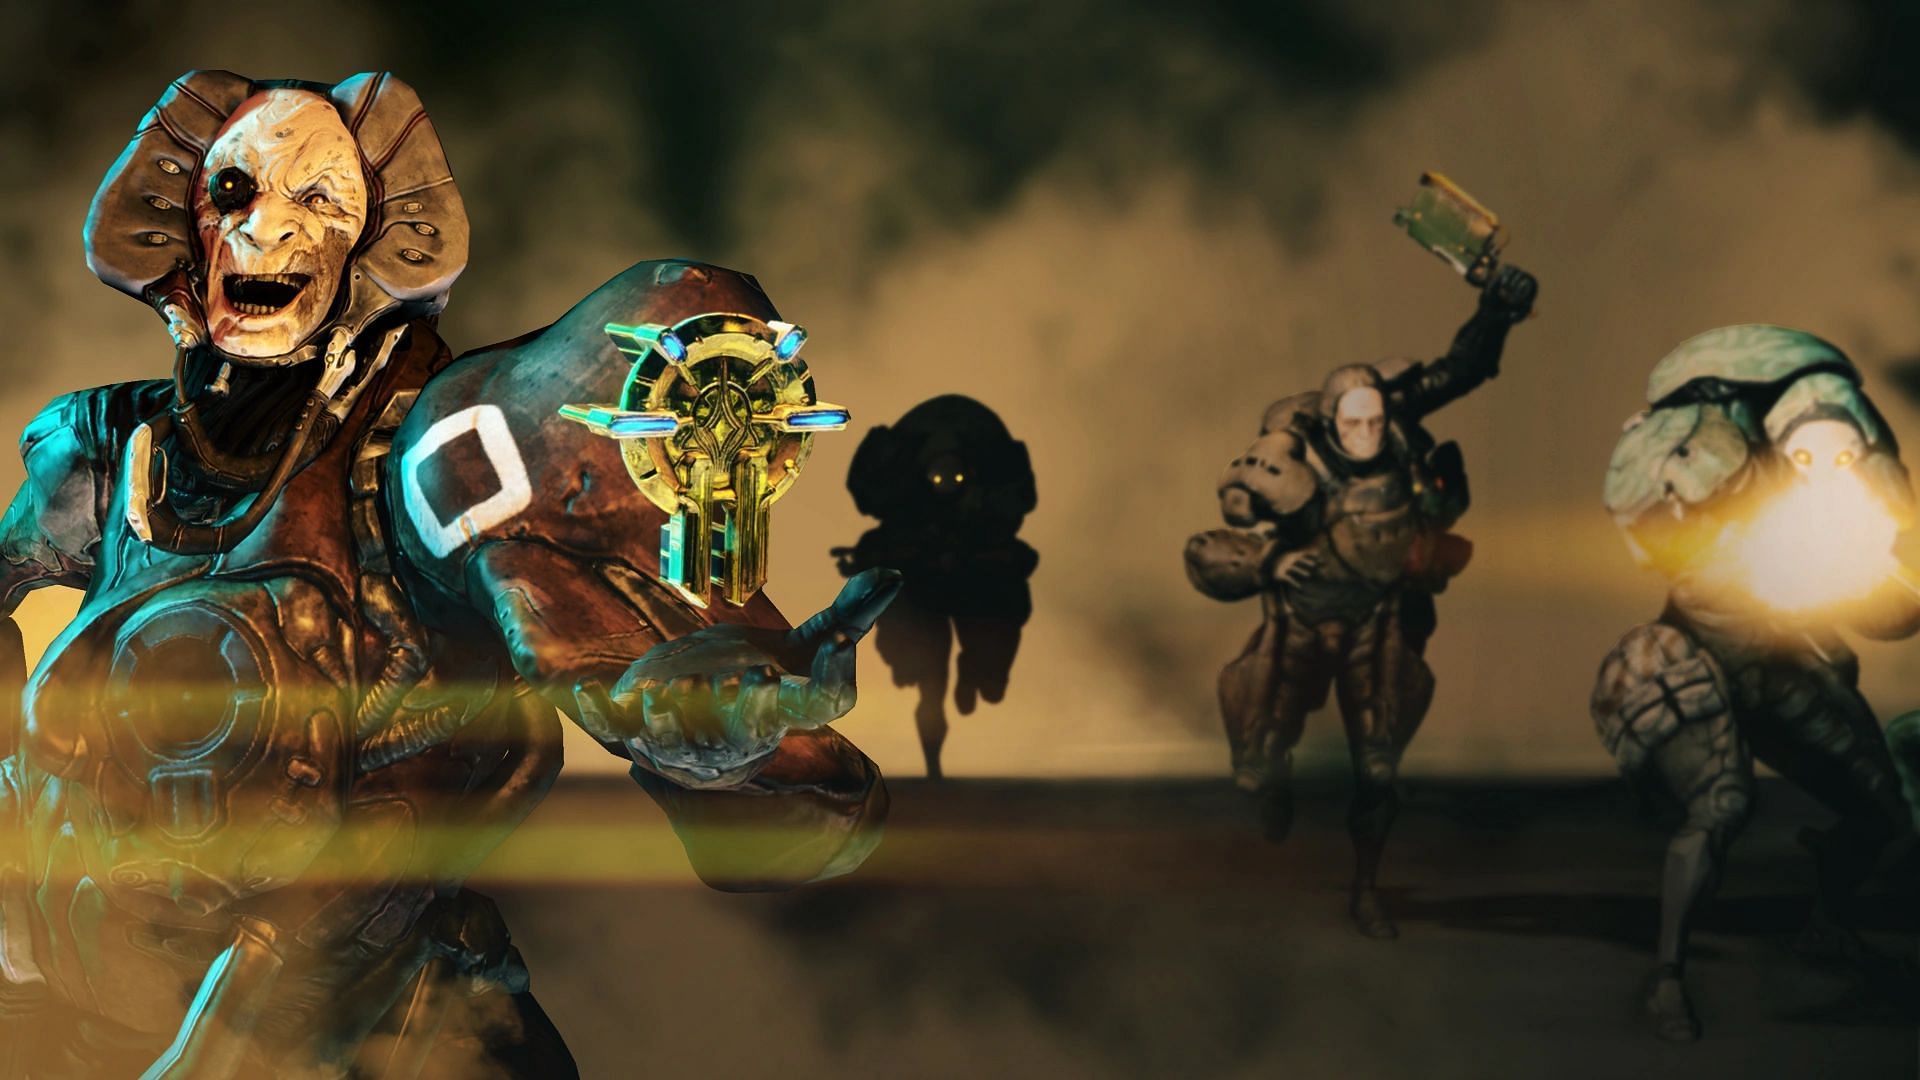 The Grineer faction in Warframe featuring Captain Vor